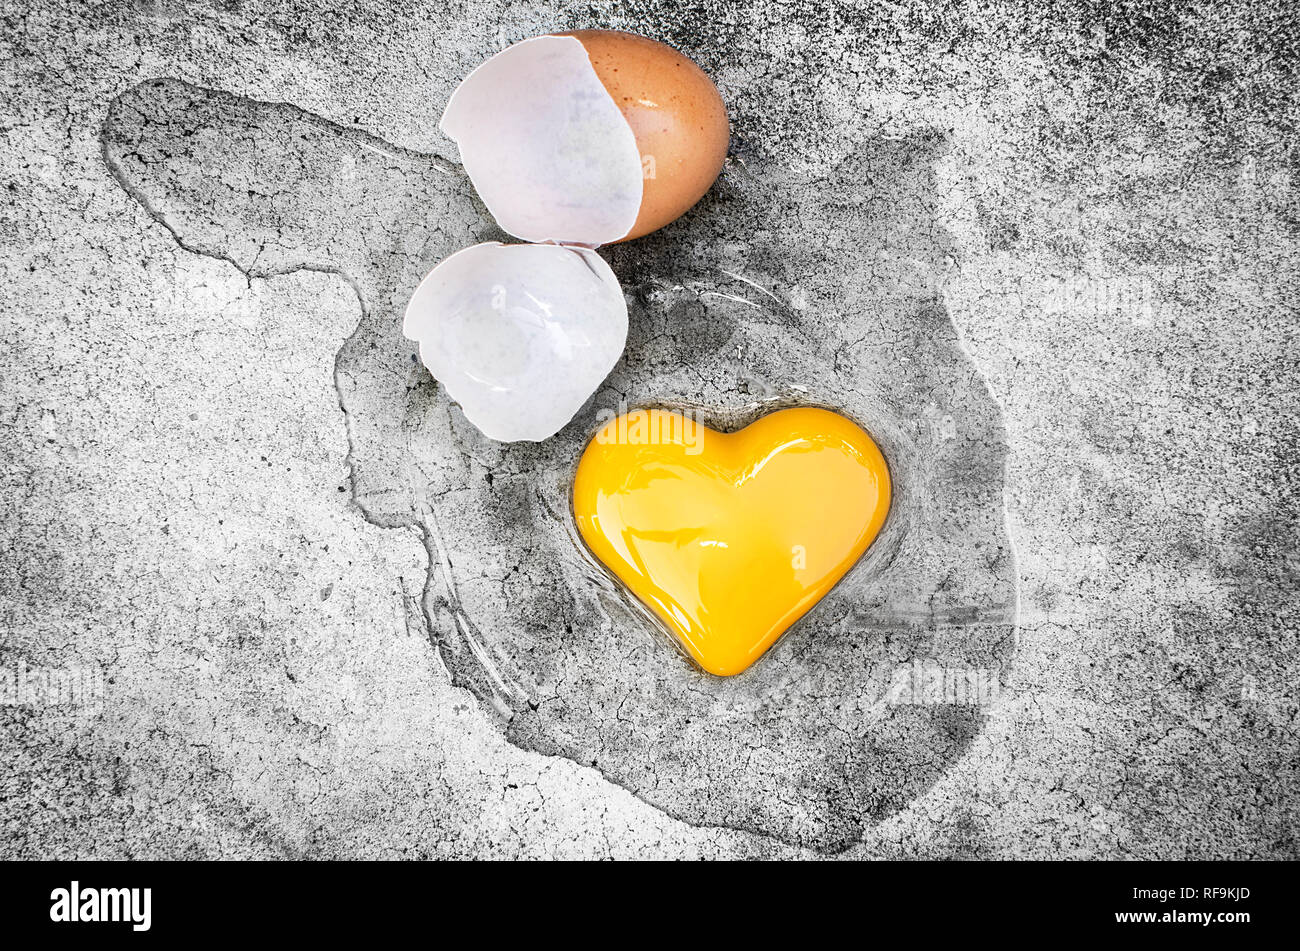 Heart Shape Egg Yolk with eggshells on the ground. Concept Valentines Day Stock Photo